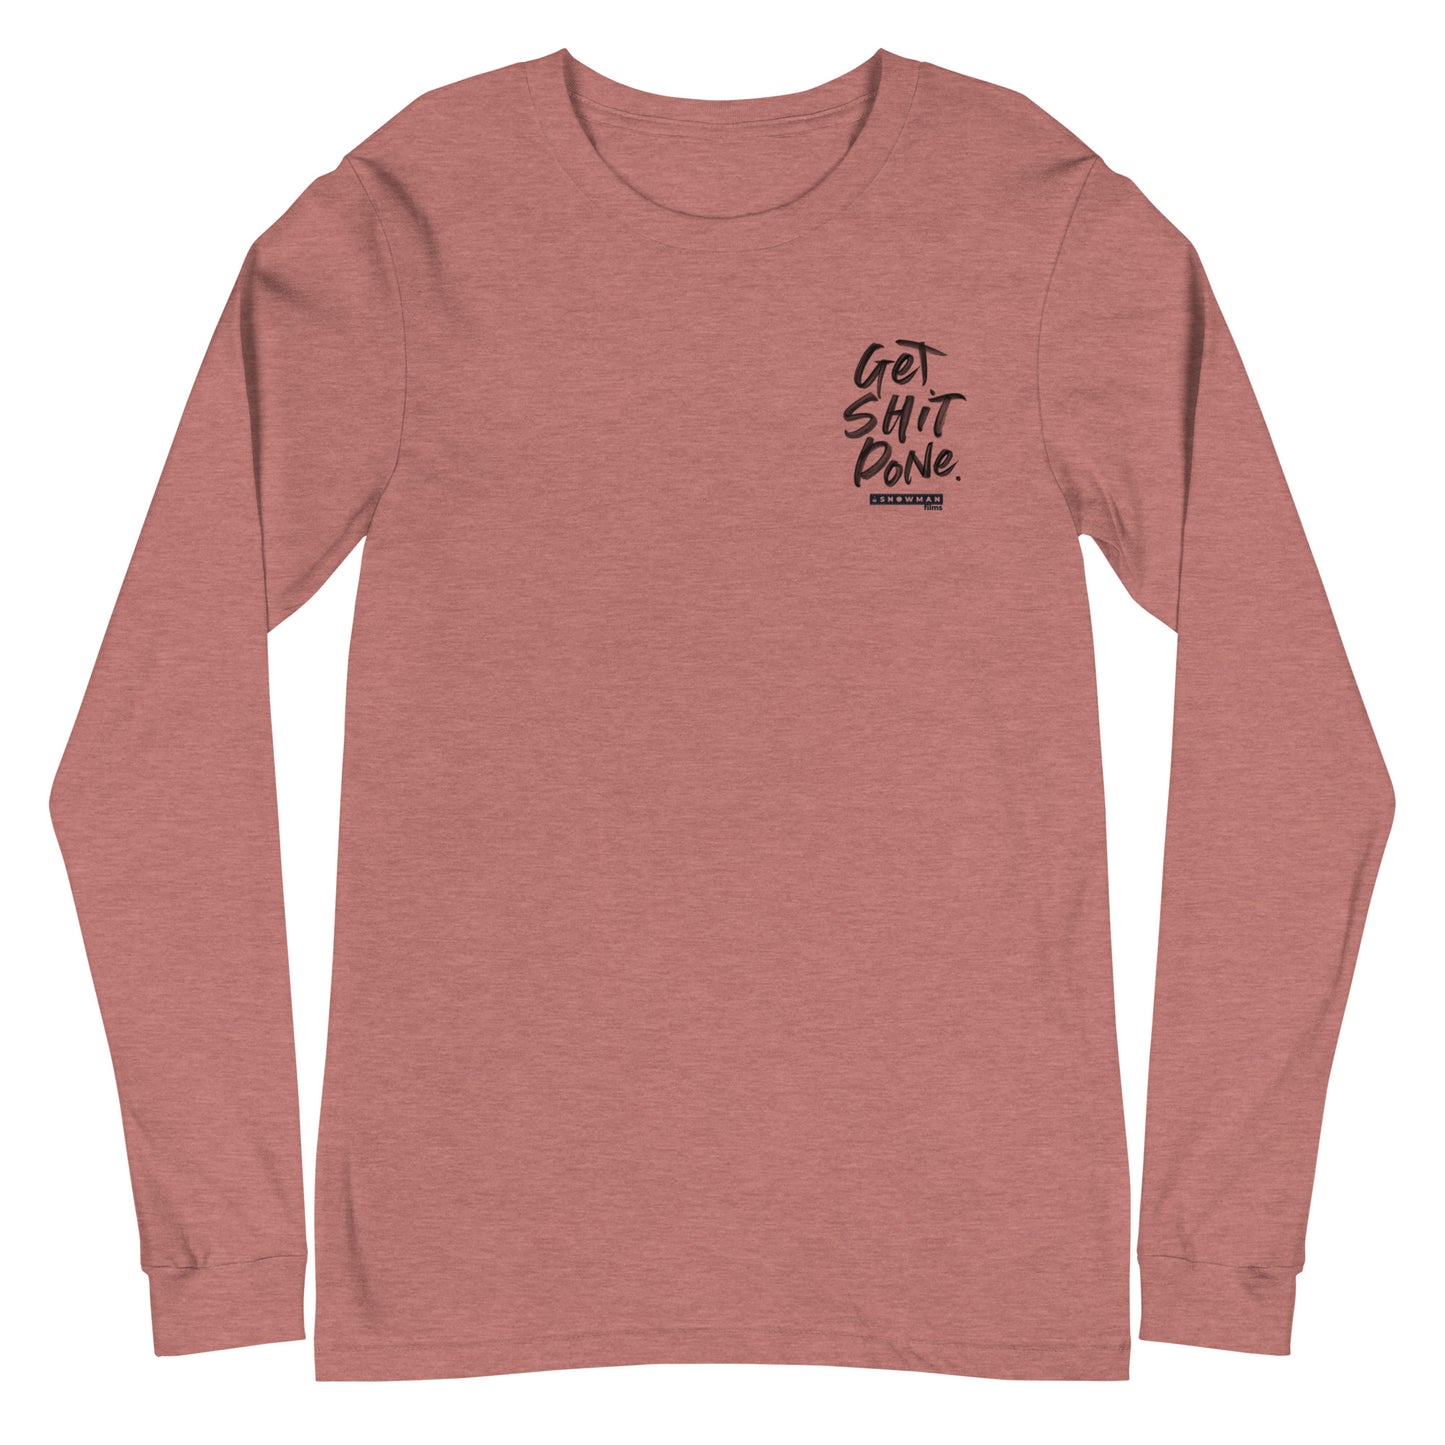 Get Shit Done Long Sleeve Tee